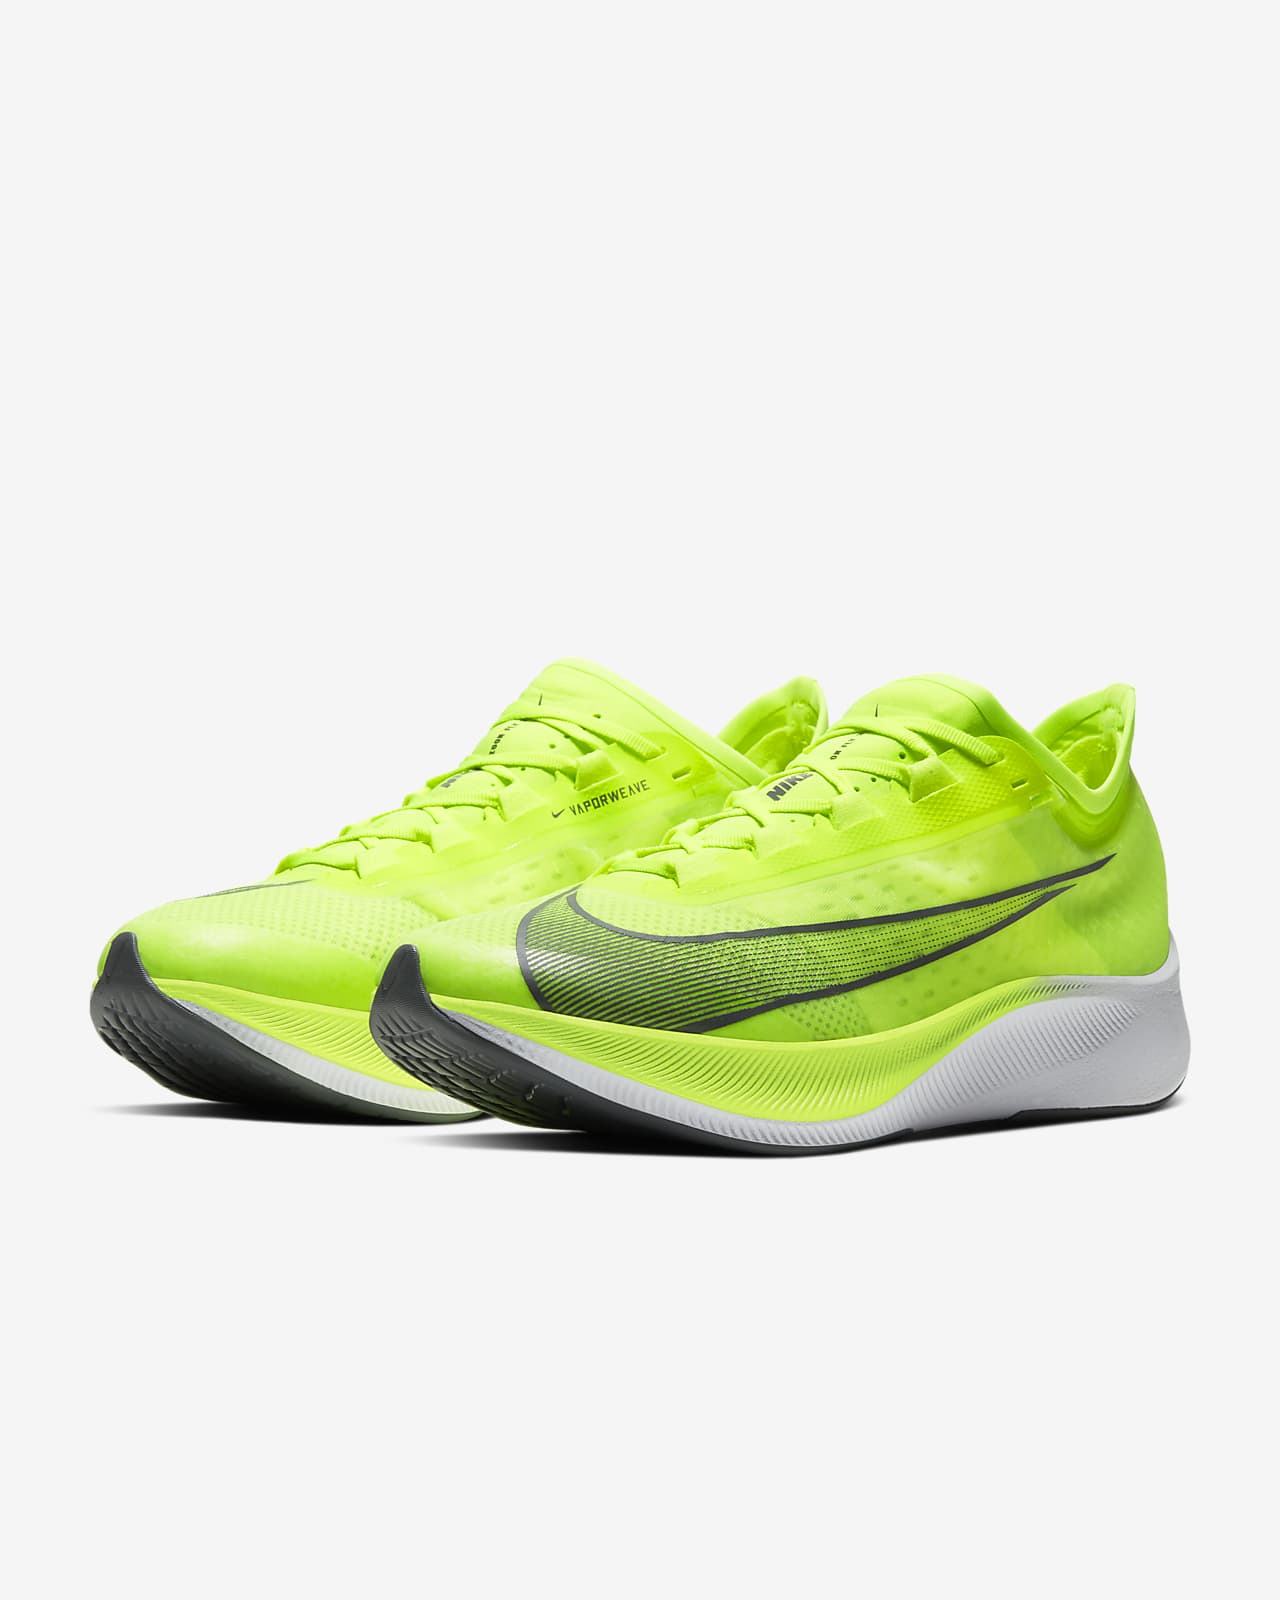 Nike Zoom Fly 3 Men's Road Running Shoes